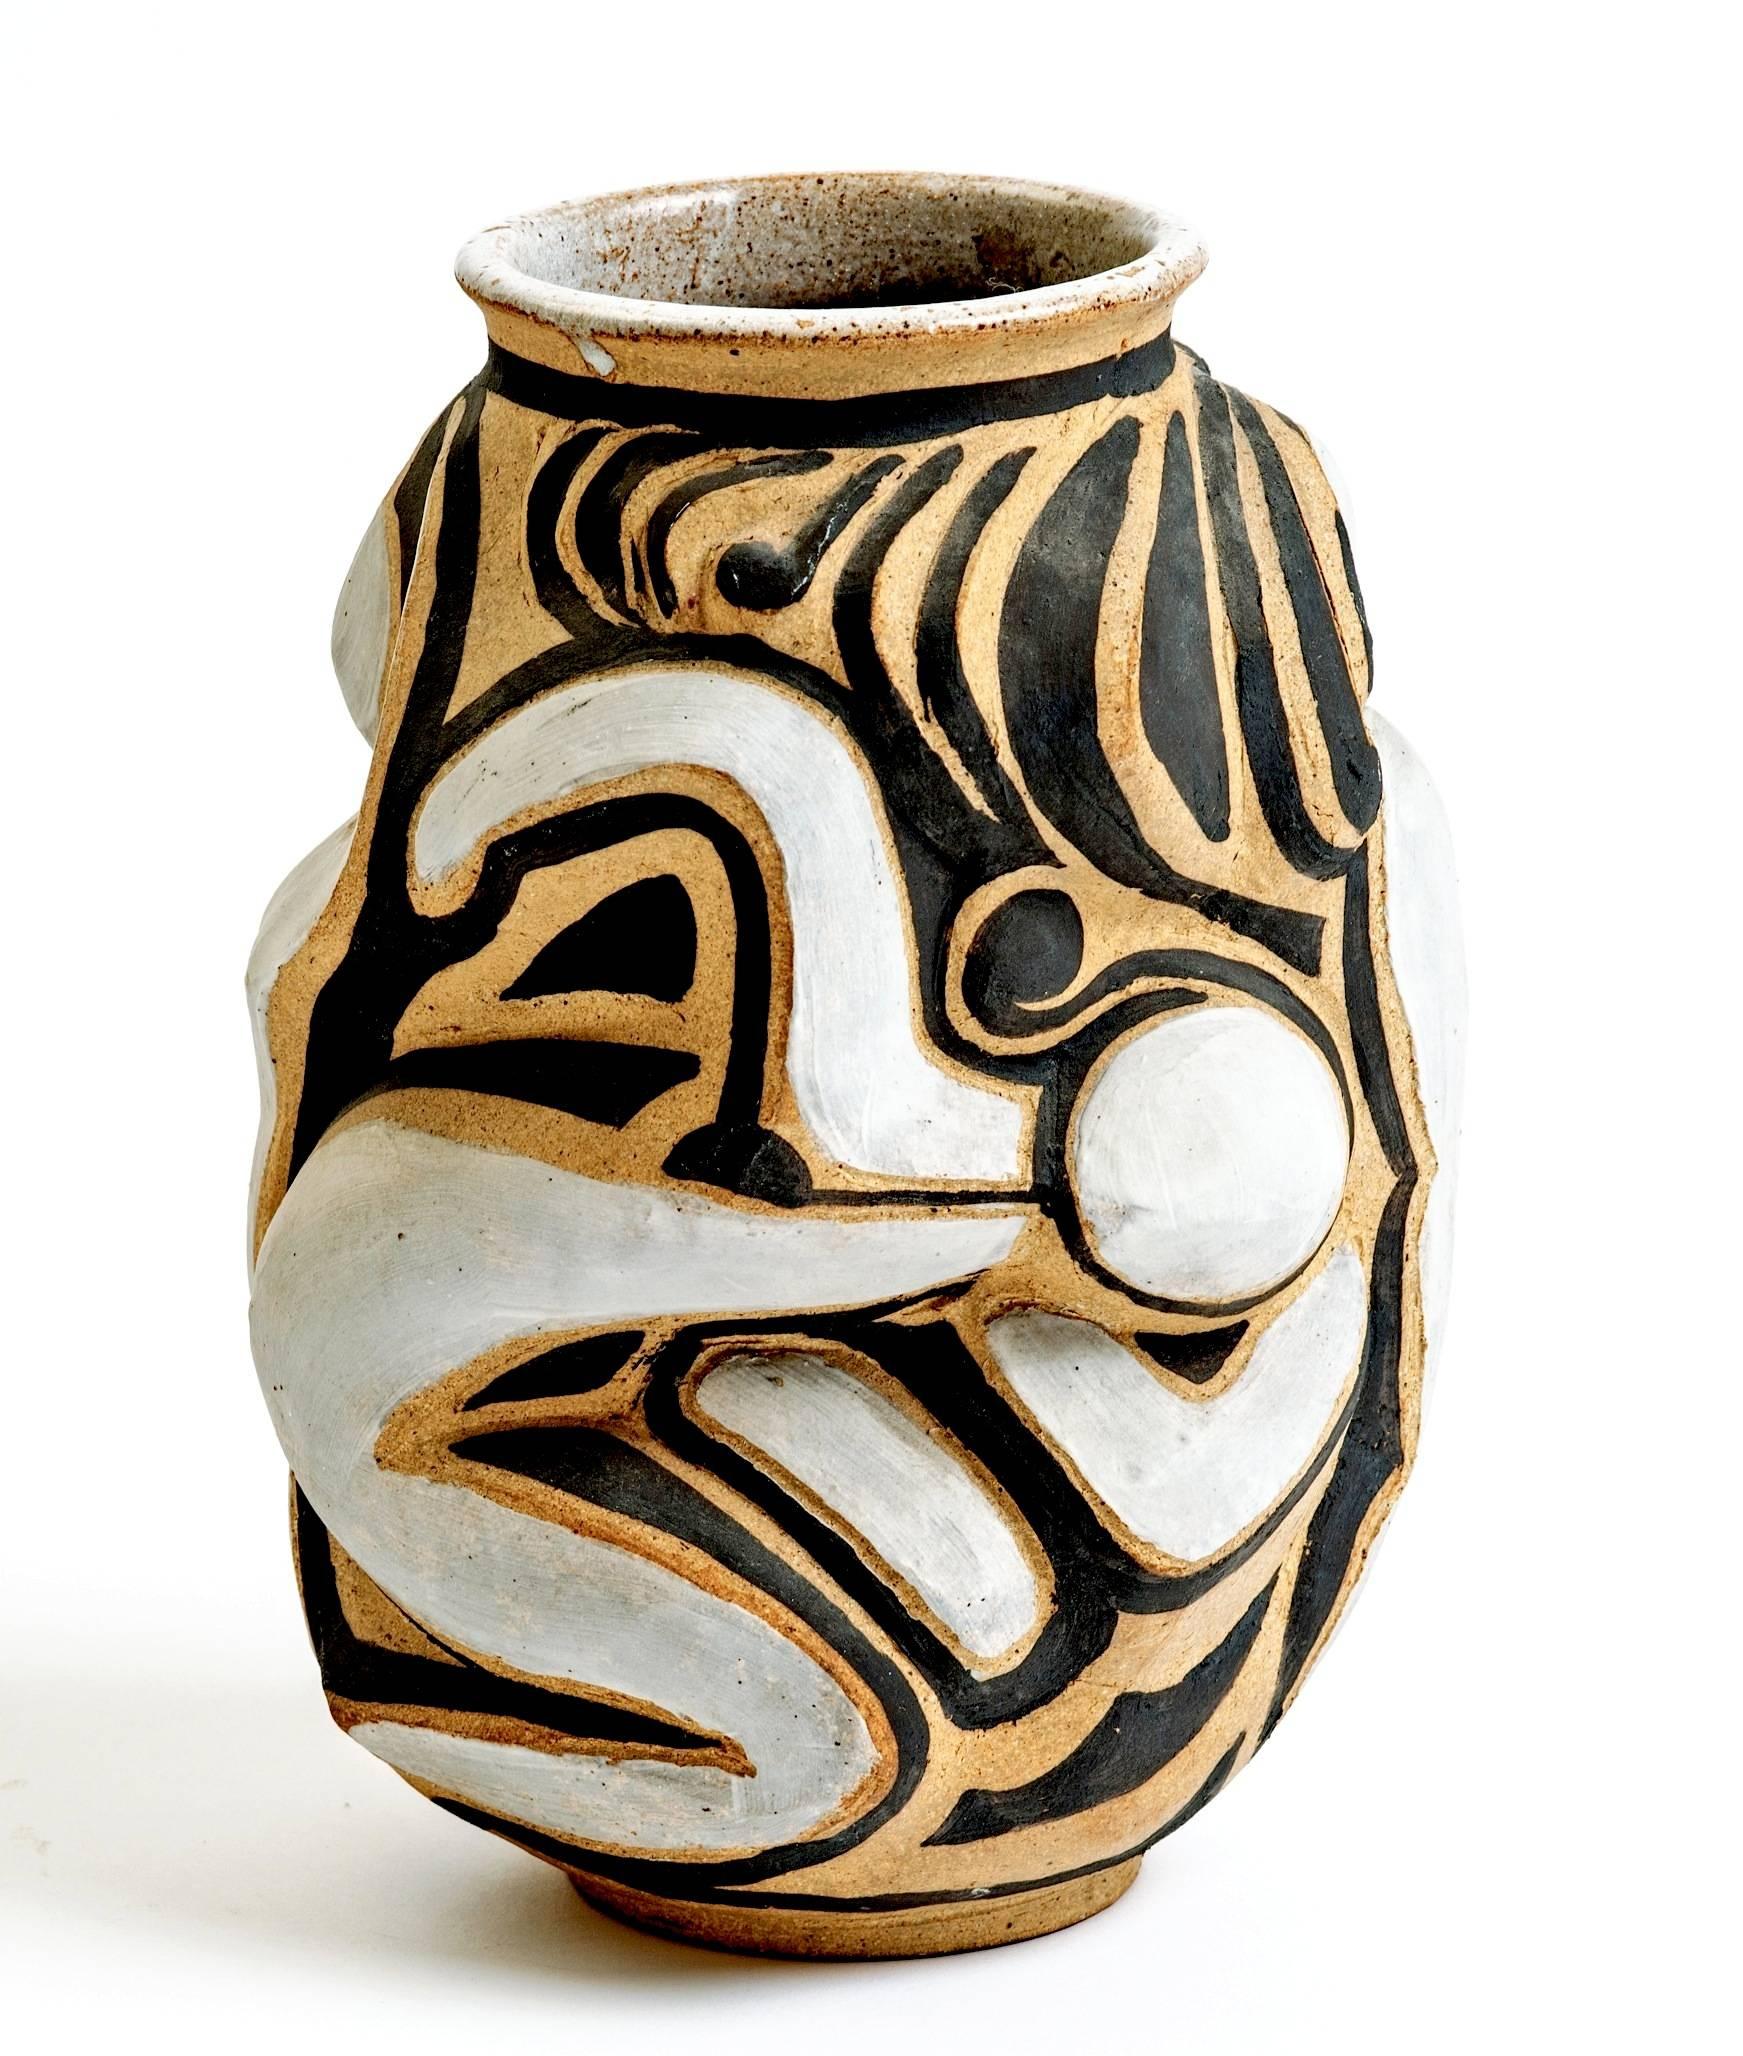 Extra large and quite dynamite this French figural stoneware vase is simply amazing. Multiple carved figures in an incredible scale create this unique sculptural design that has unending movement. Signed.